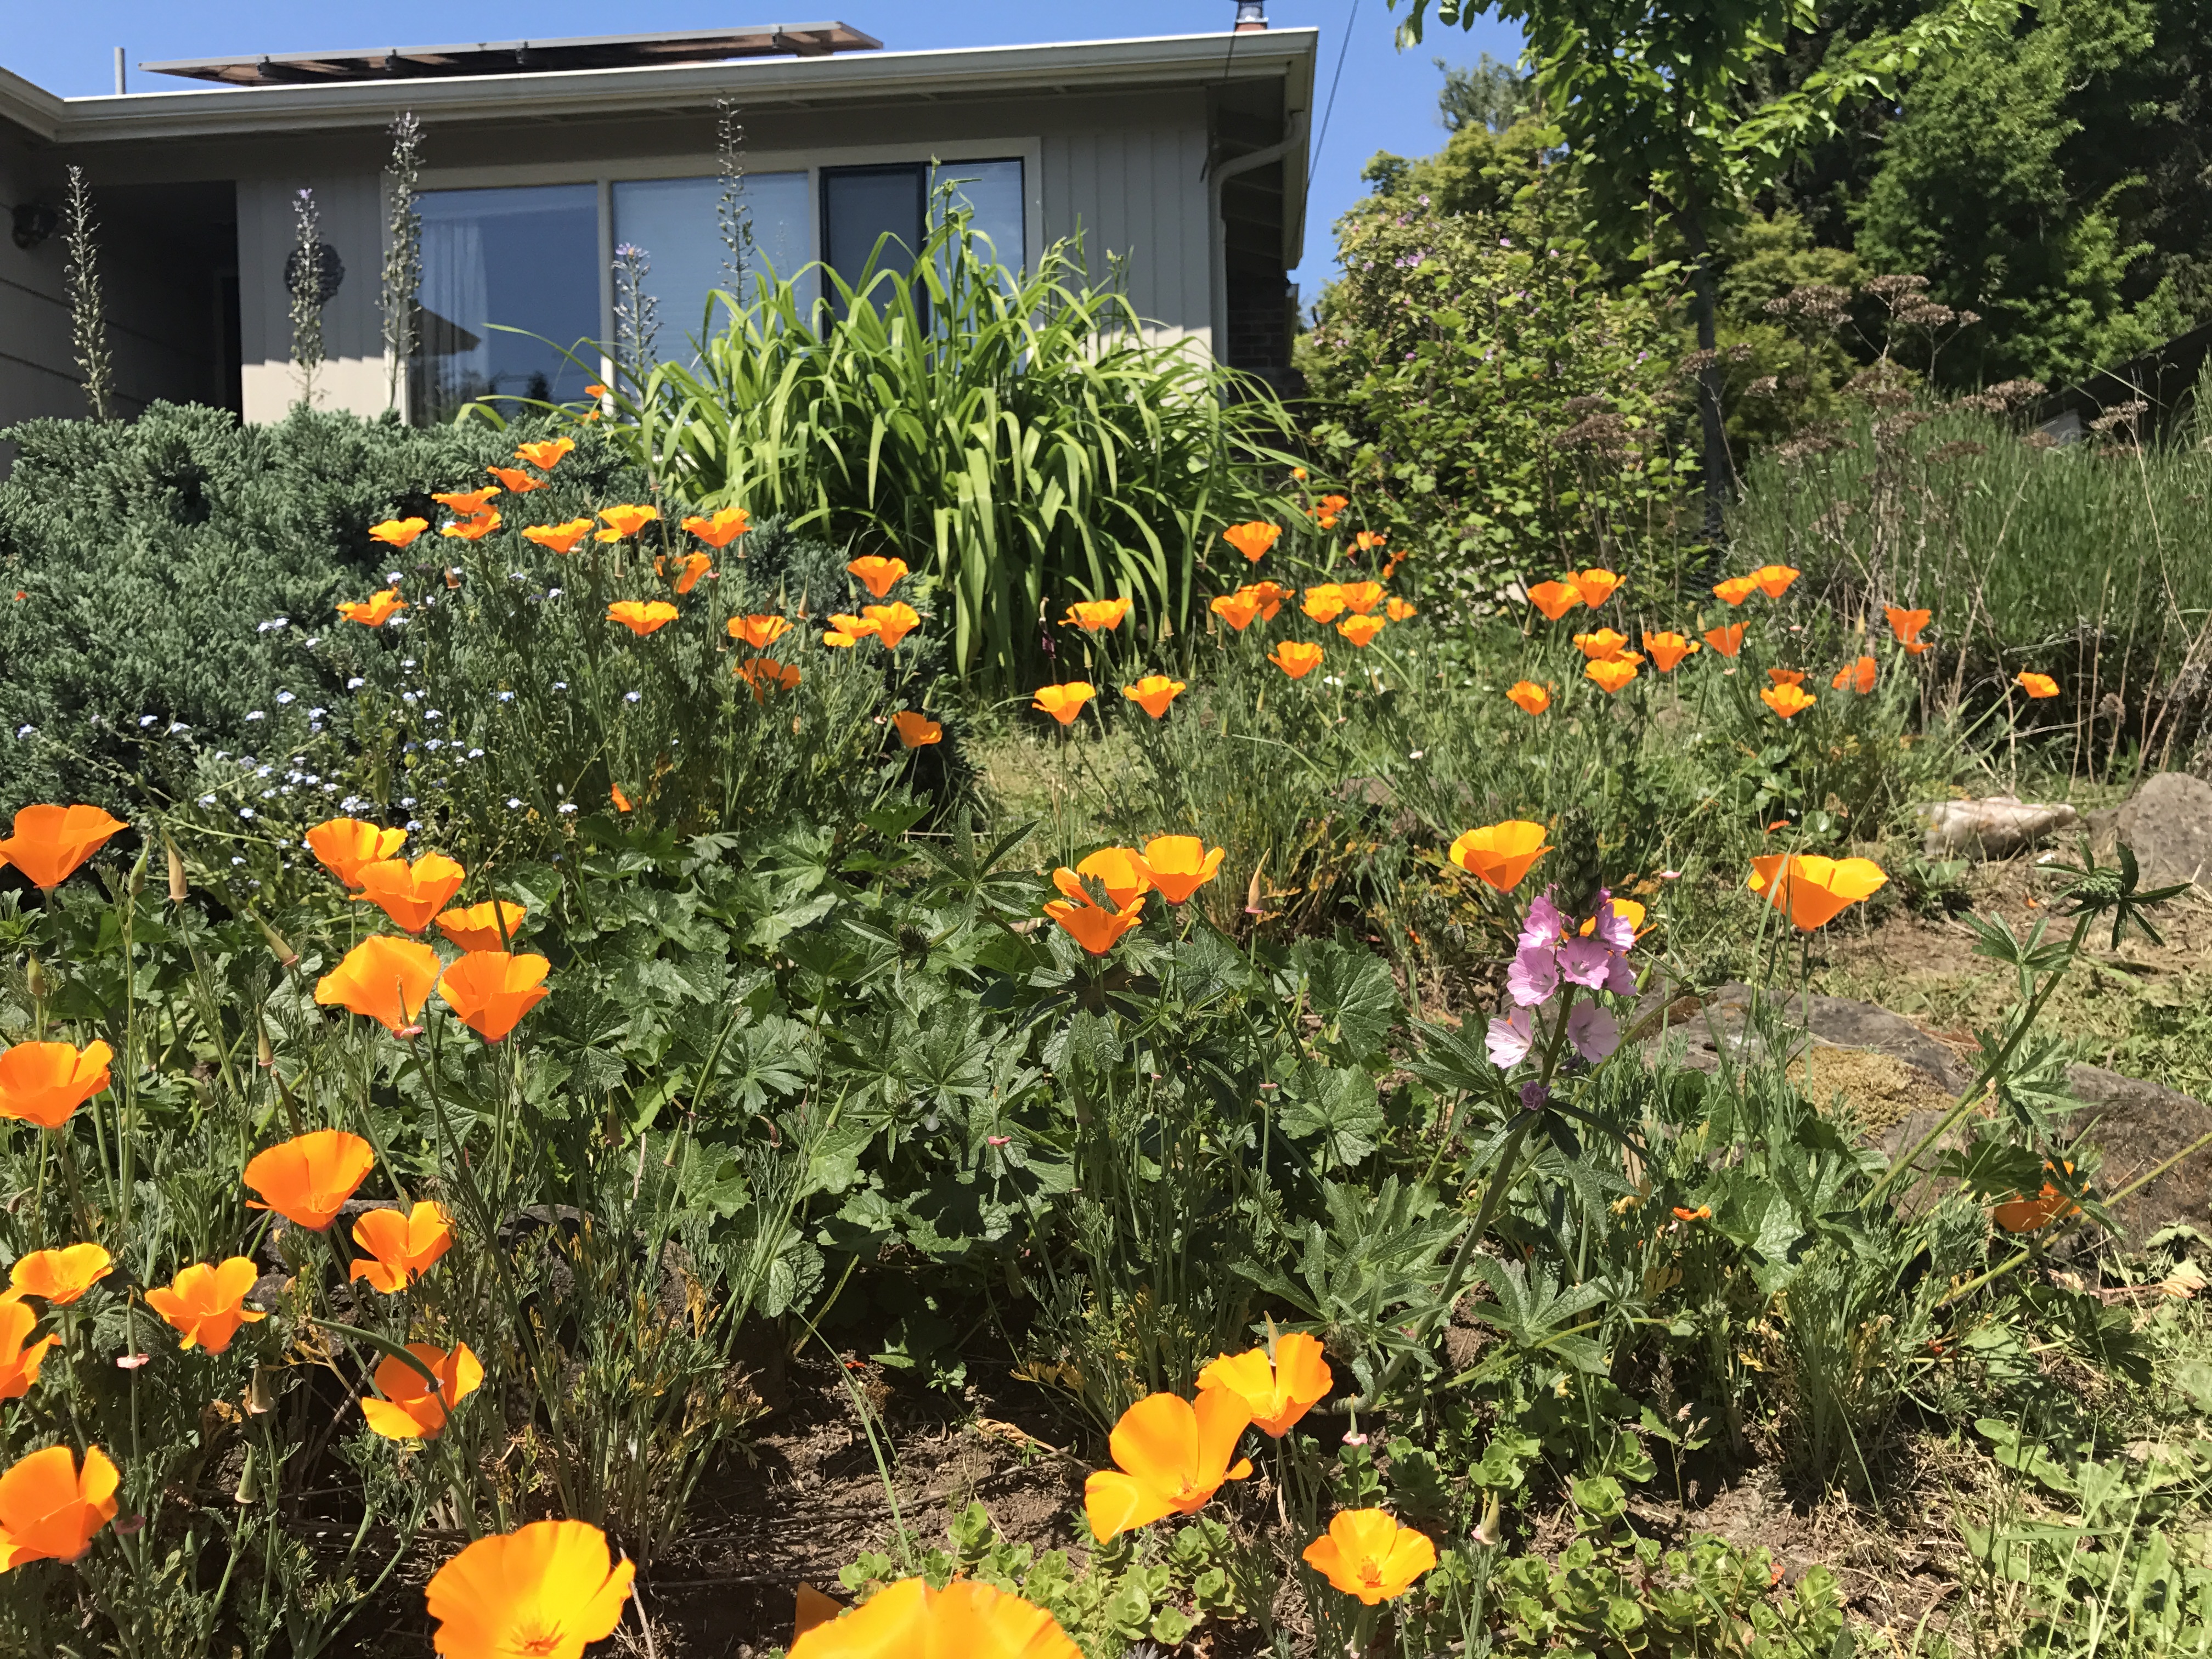 A small front yard garden with bright orange California poppies and shrubbery.